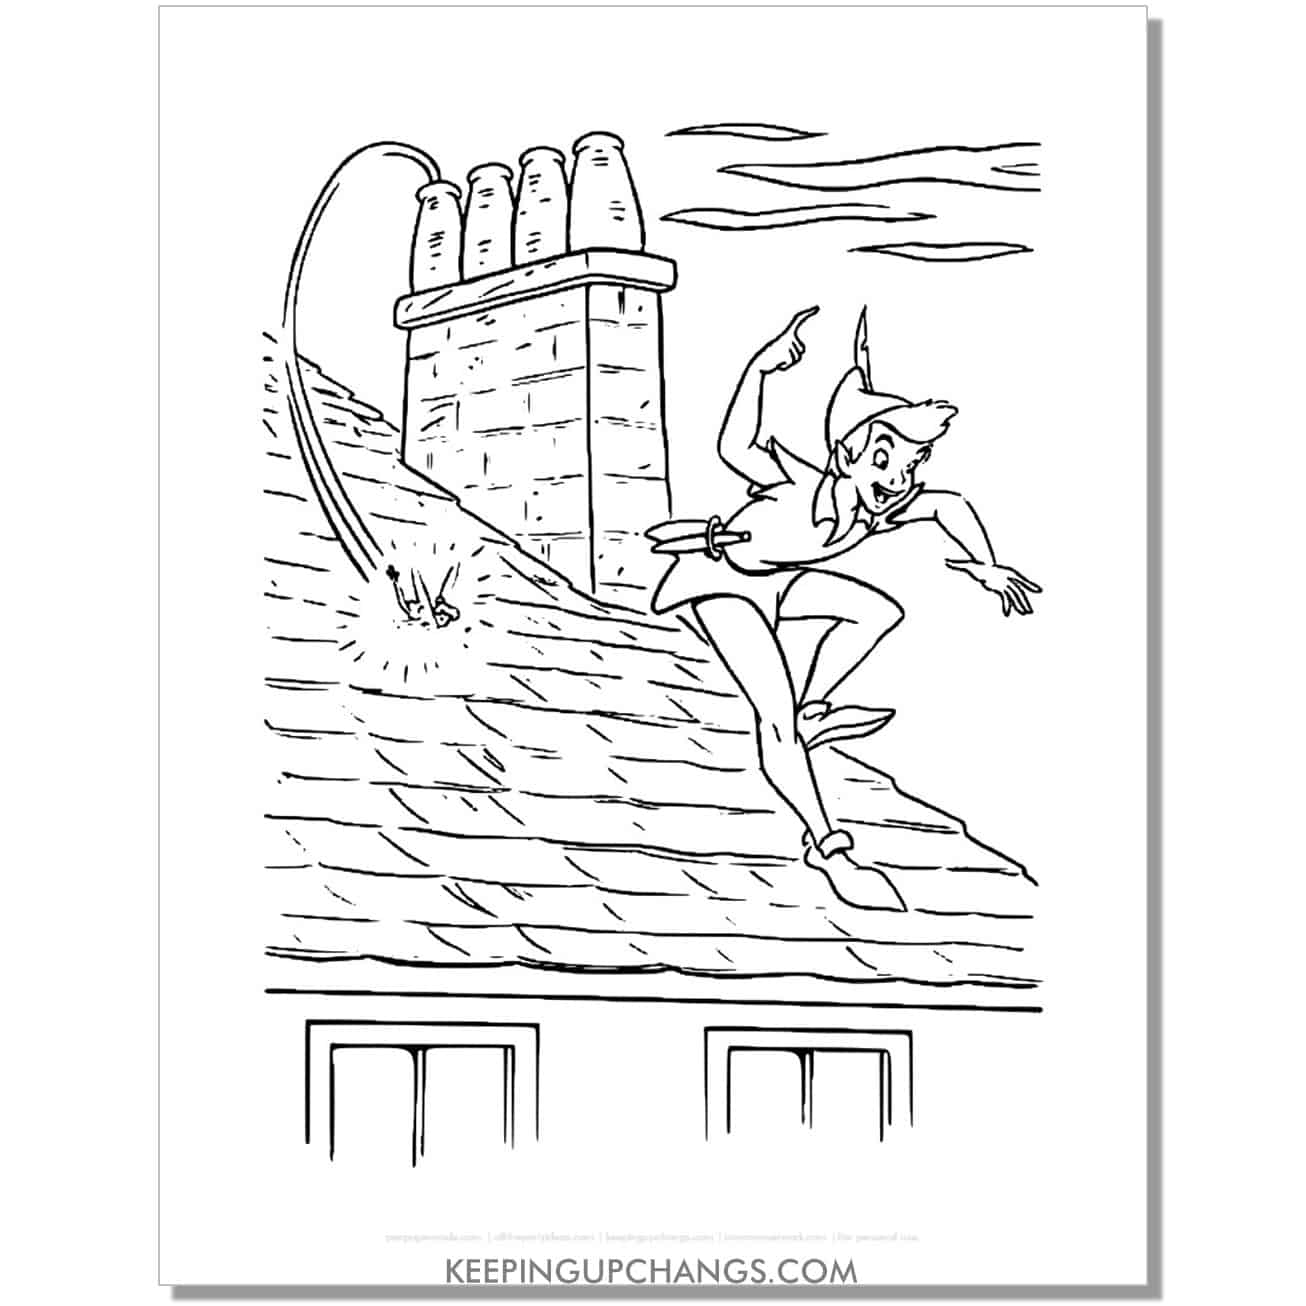 tinkerbell and peter pan on the rooftop coloring page, sheet.